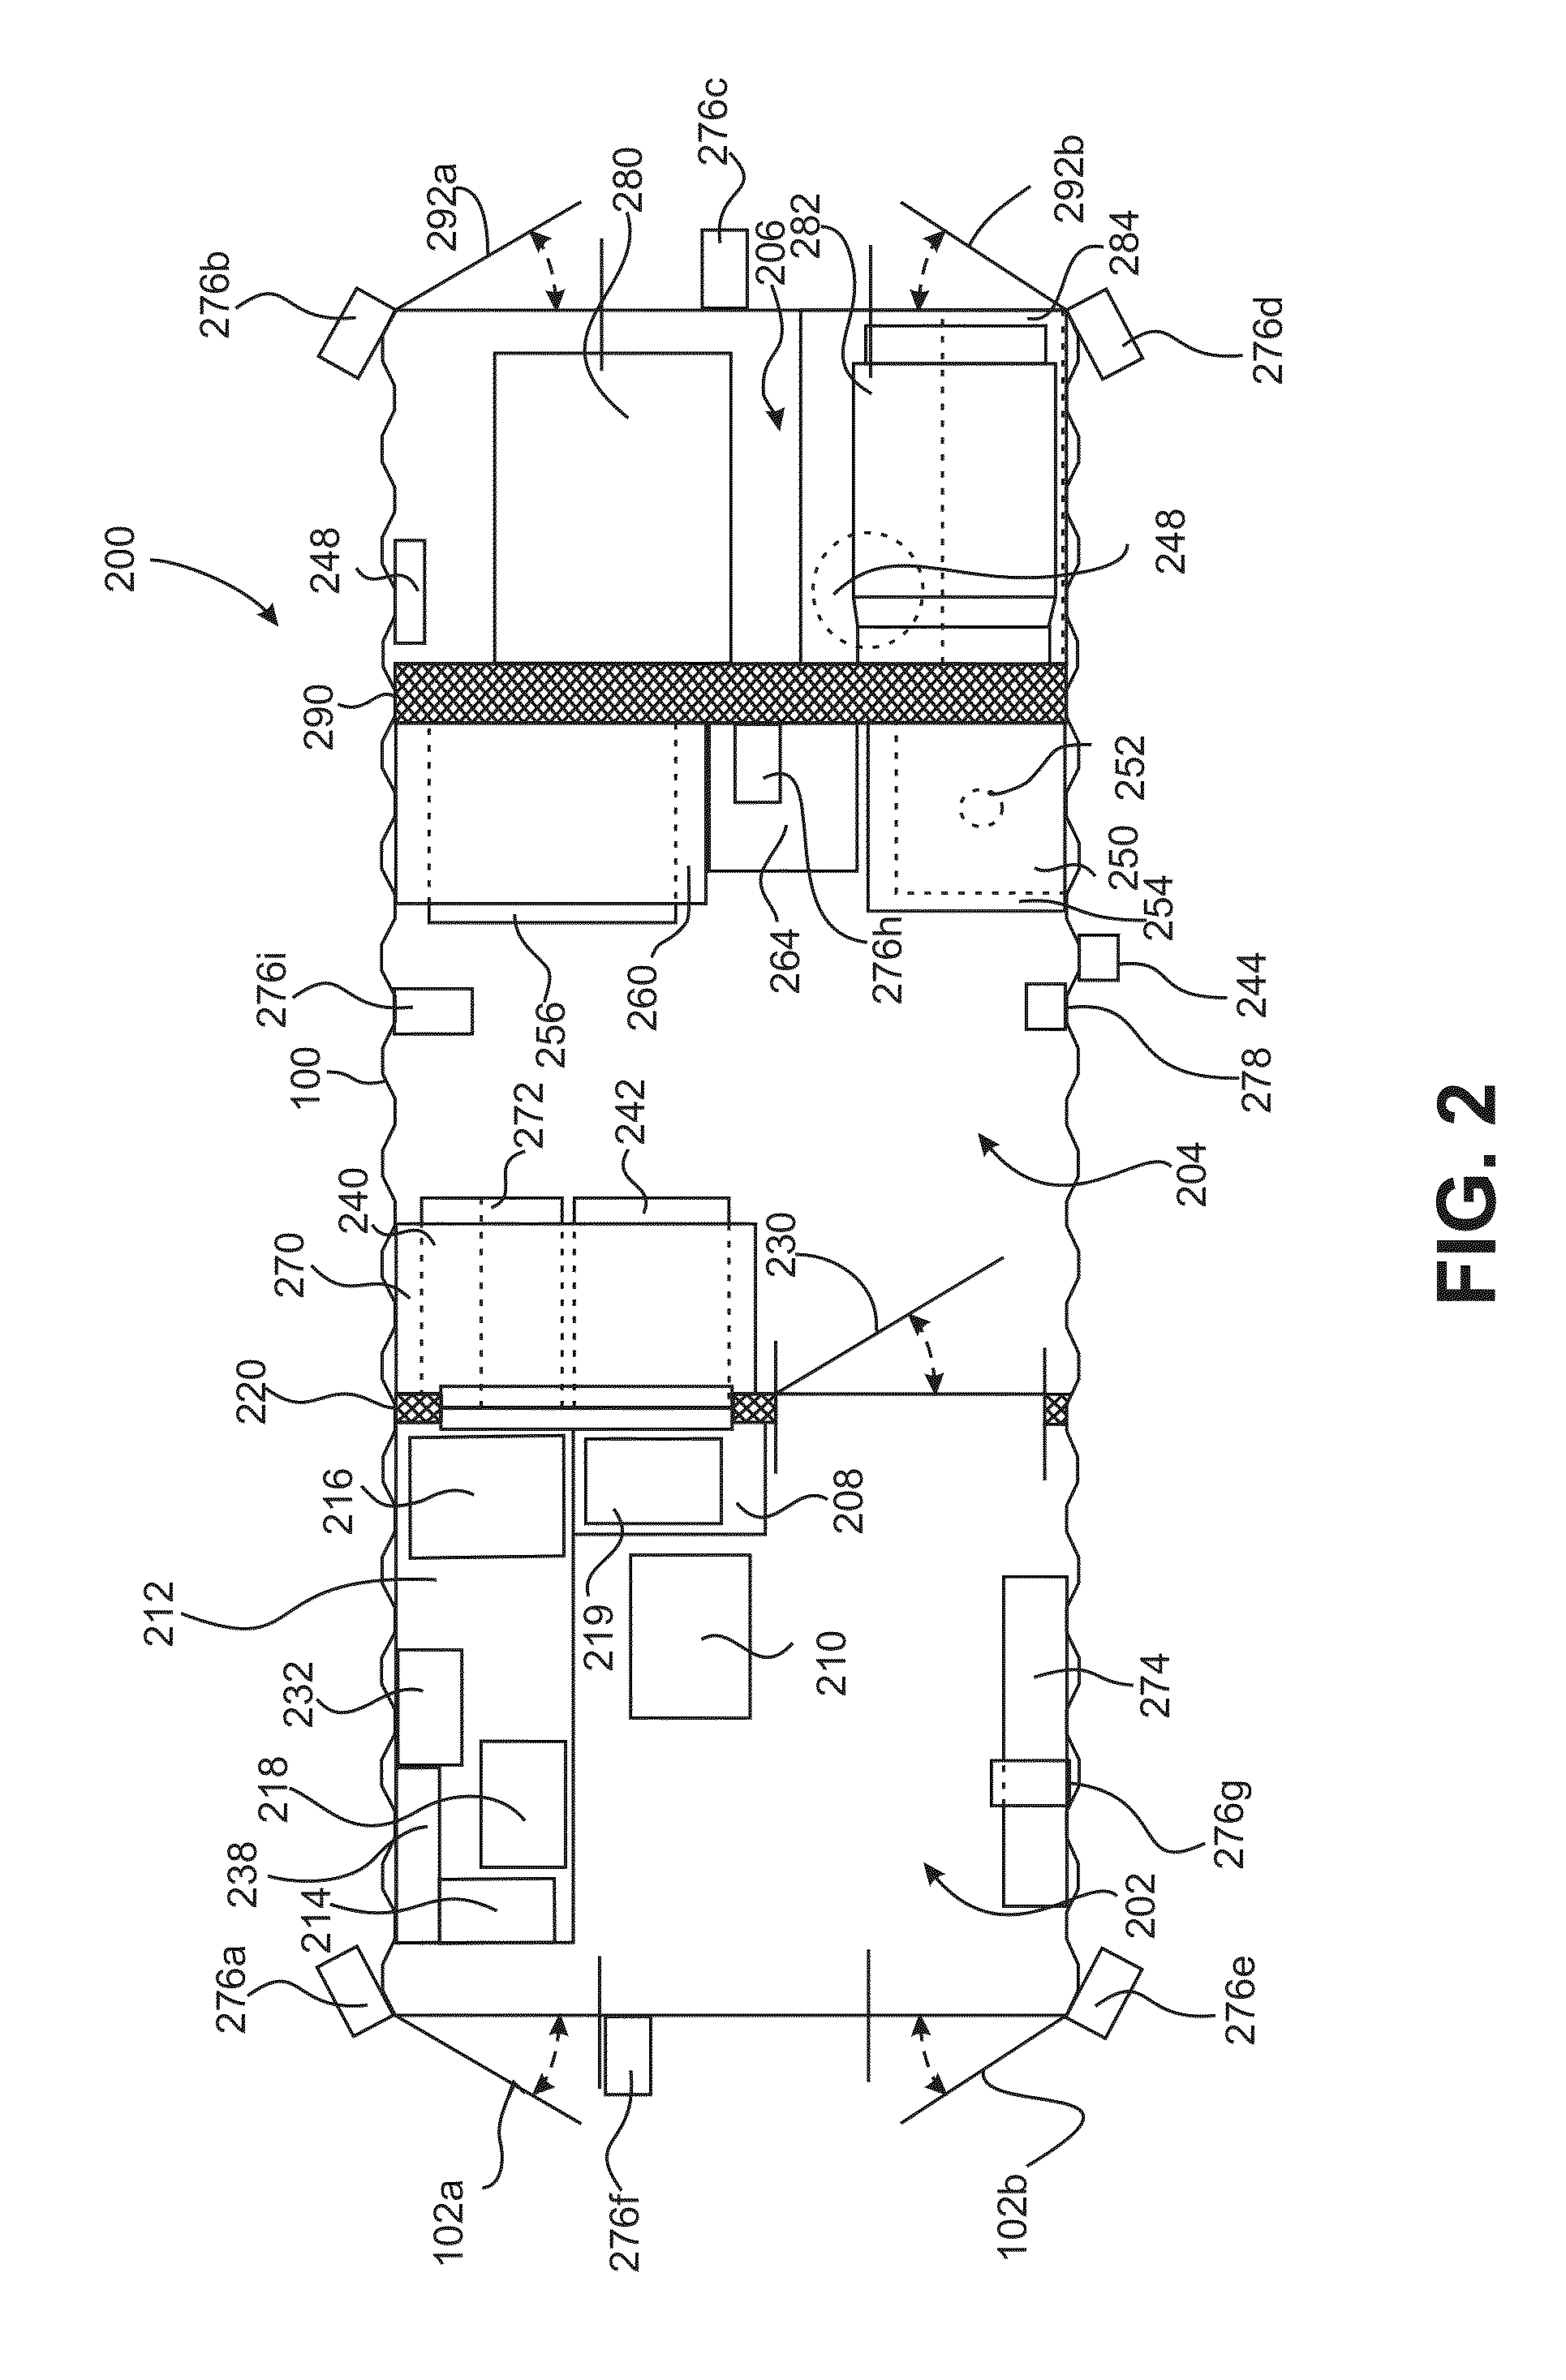 Transportable, self-contained assay facility and method of using same to procure and assay precious metals